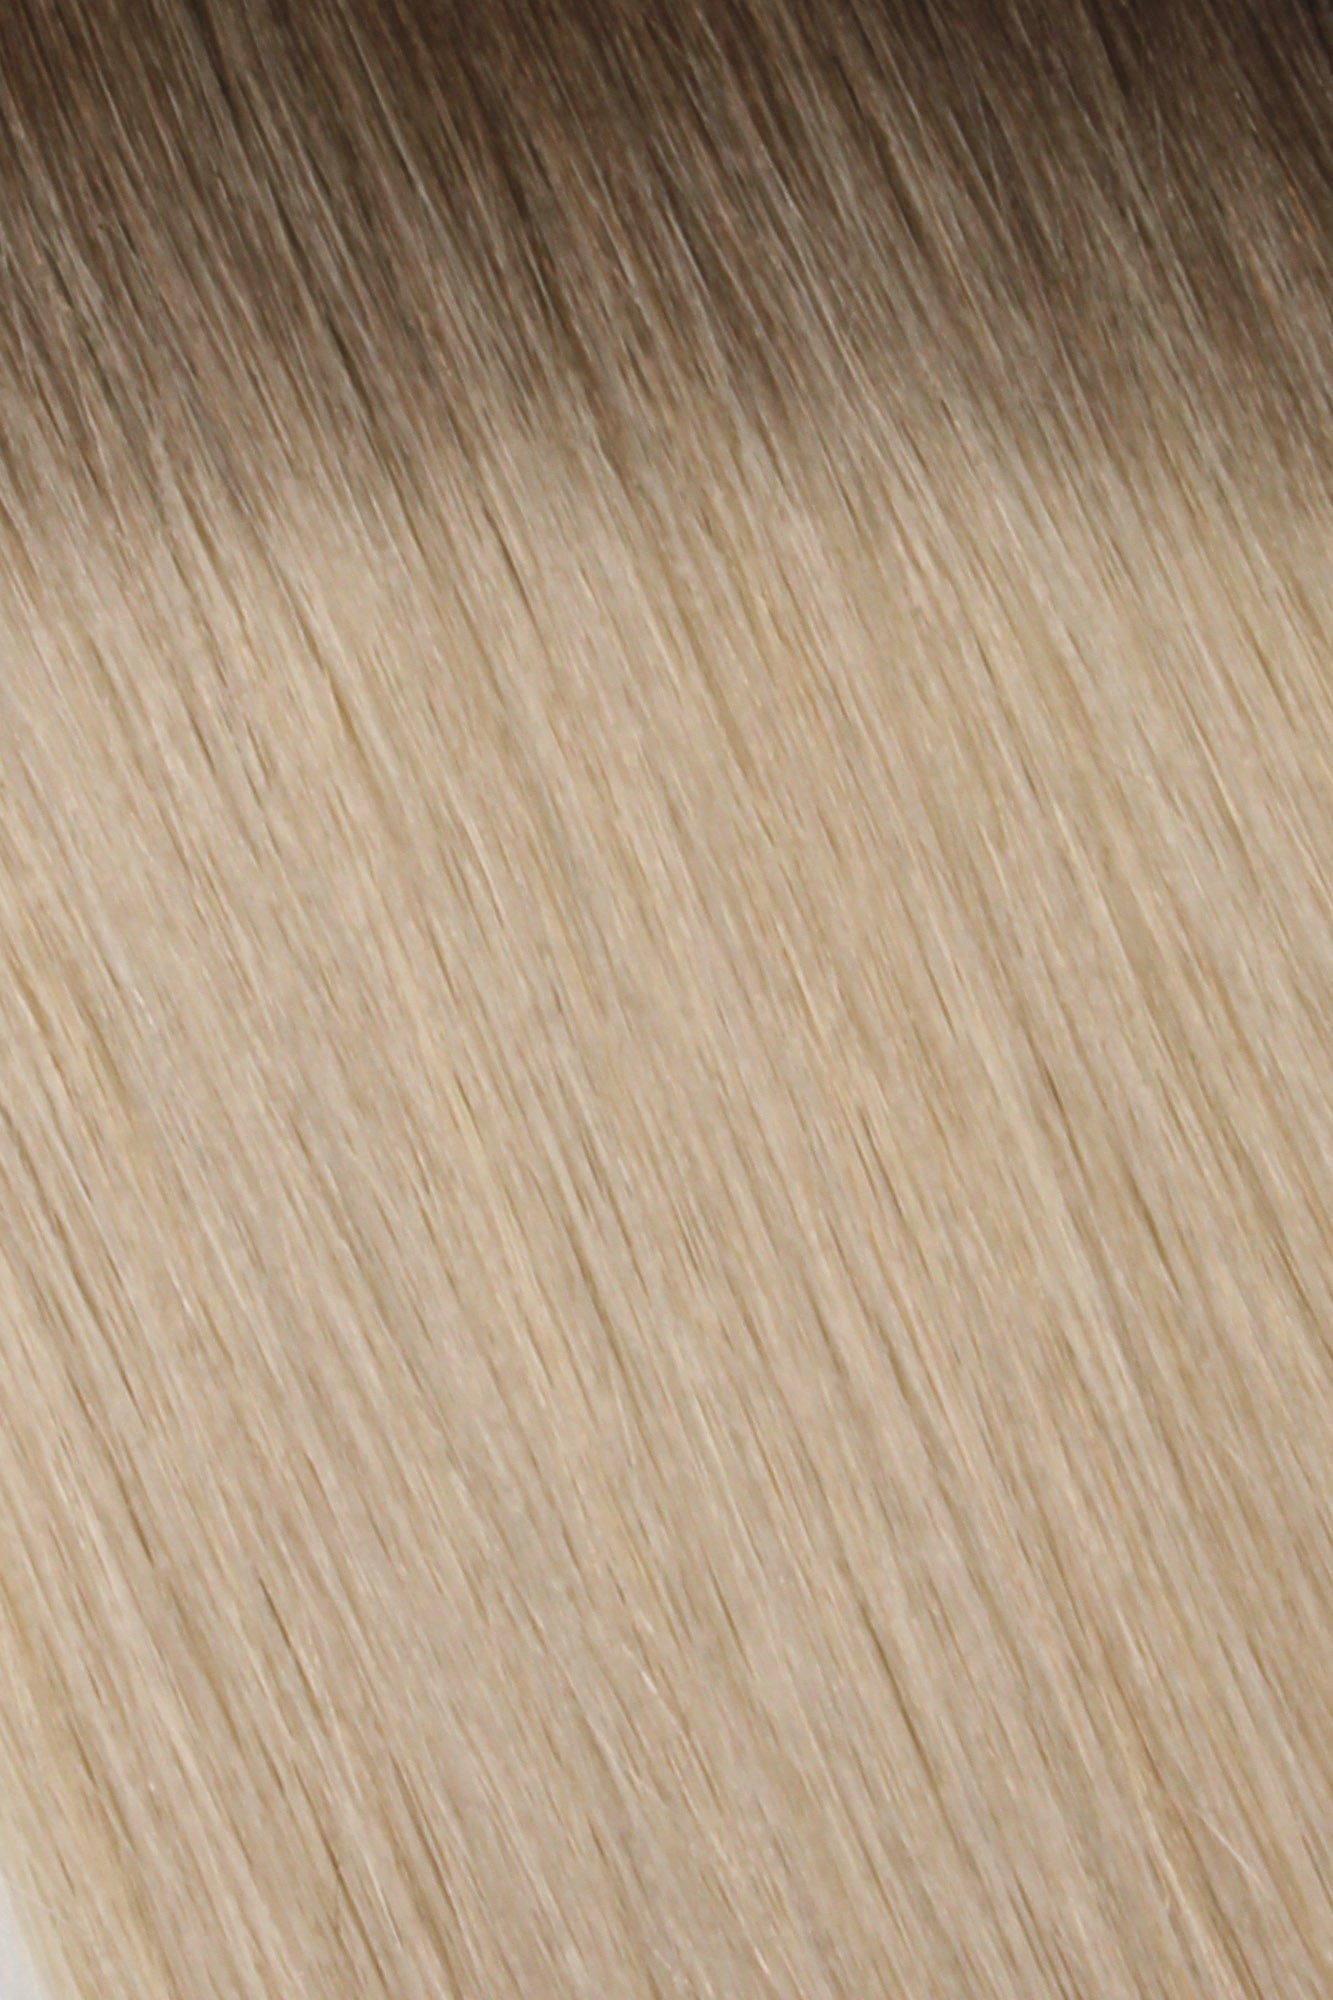 Tiny Tip Bonds 22&quot; - SWAY Hair Extensions Rooted-Hollywood-Ash-Blonde: Lightweight, discreet. Made with Italian Keratin for comfort and long-lasting wear. Reusable and compatible with other SWAY Salon Professional Methods